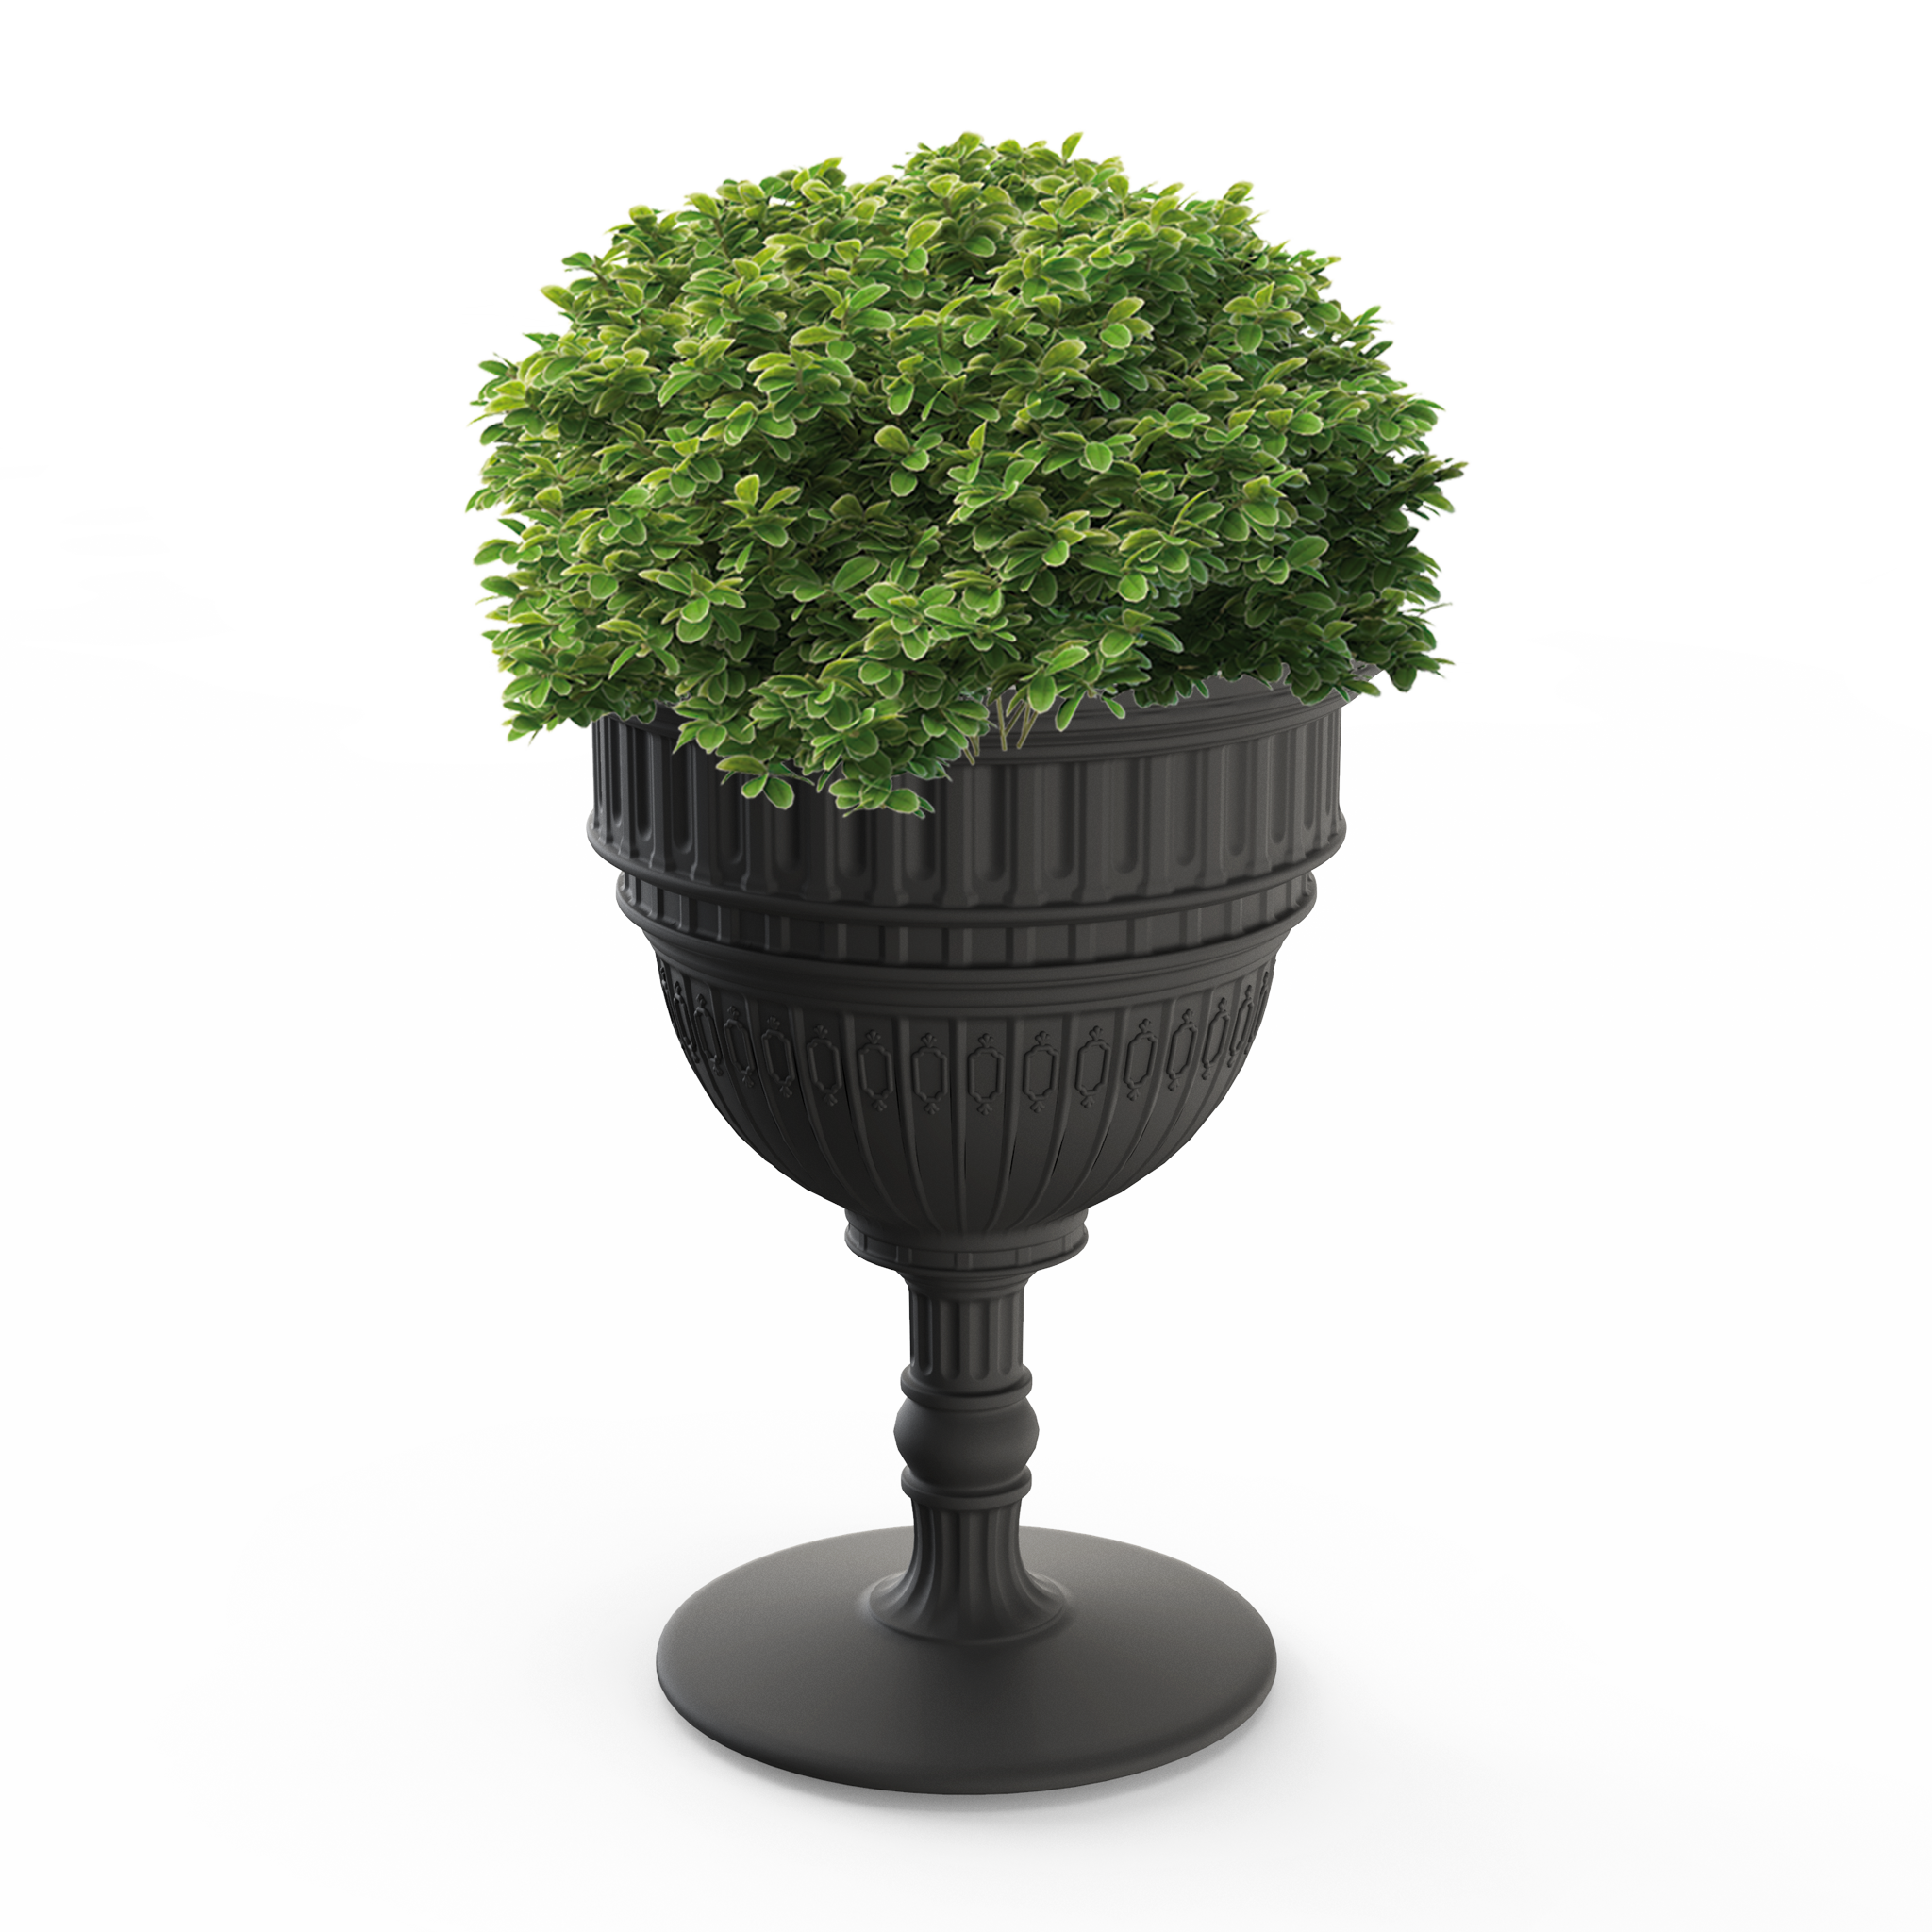 Qeeboo CAPITOL Planter or Champagne Cooler